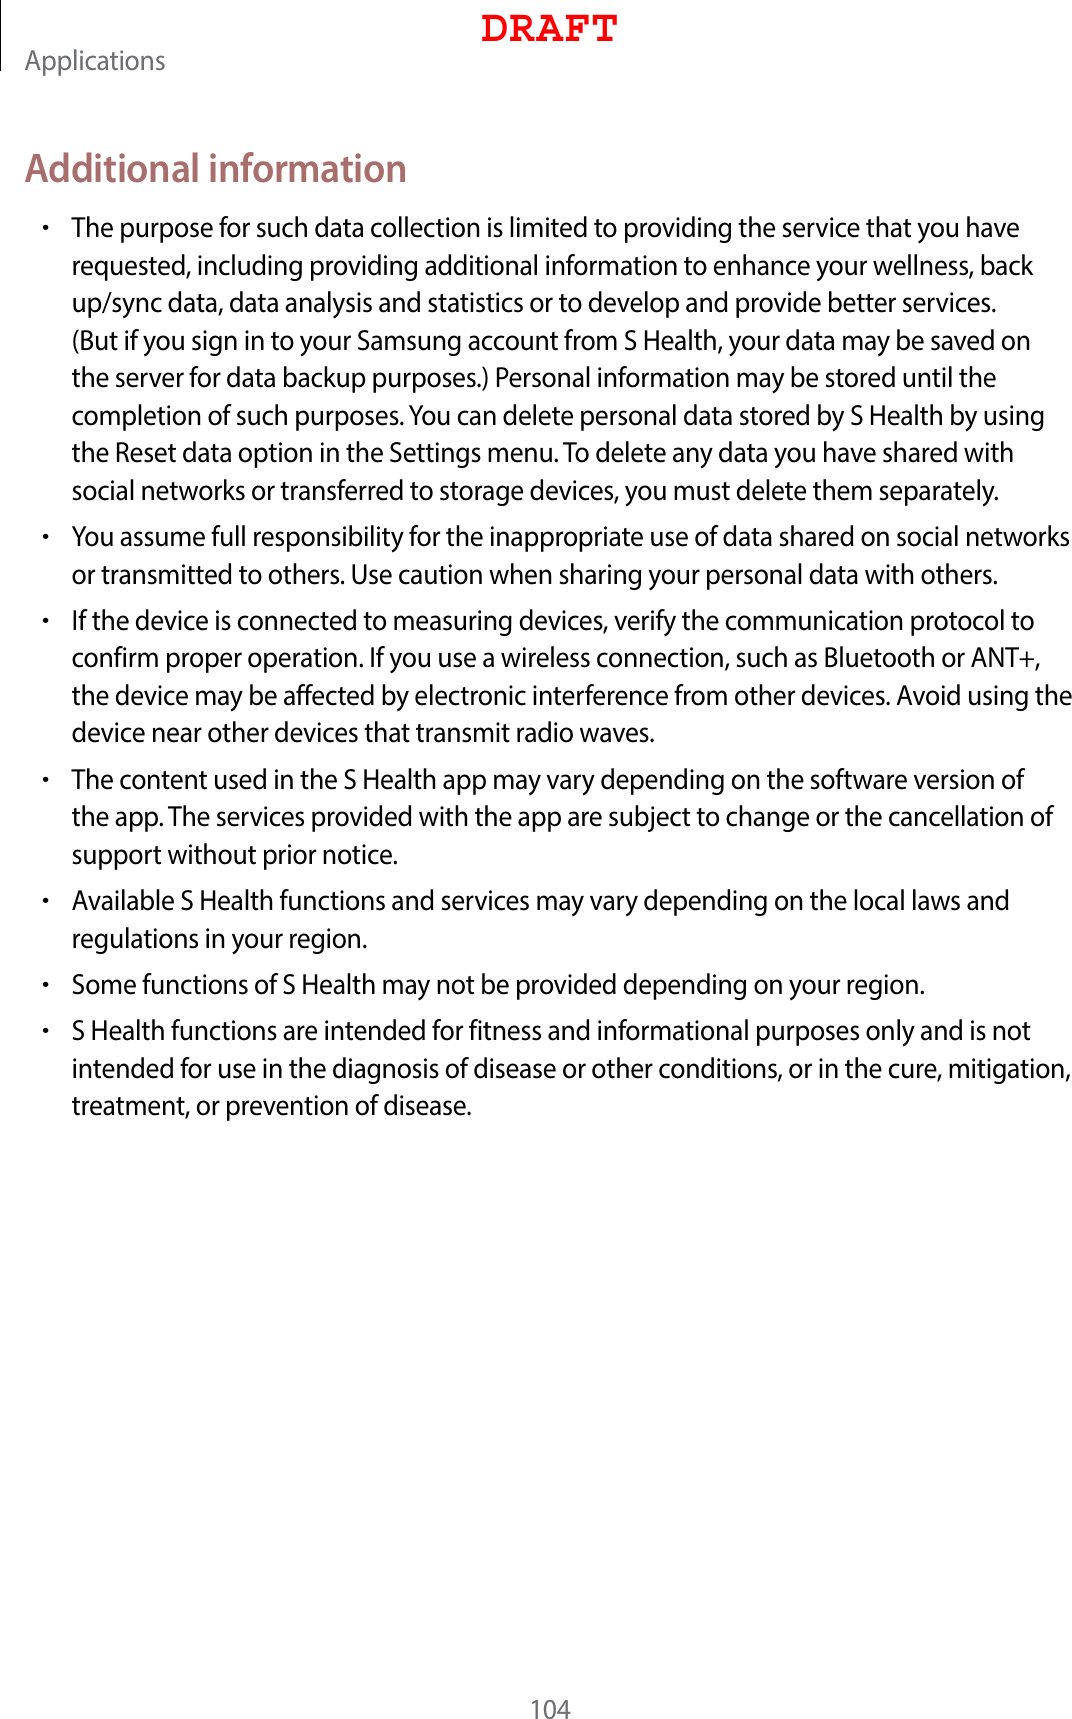 Applications104Additional information•The purpose for such data collection is limited to providing the service that you have requested, including providing additional information to enhance your wellness, back up/sync data, data analysis and statistics or to develop and provide better services. (But if you sign in to your Samsung account from S Health, your data may be saved on the server for data backup purposes.) Personal information may be stored until the completion of such purposes. You can delete personal data stored by S Health by using the Reset data option in the Settings menu. To delete any data you have shared with social networks or transferred to storage devices, you must delete them separately.•You assume full responsibility for the inappropriate use of data shared on social networks or transmitted to others. Use caution when sharing your personal data with others.•If the device is connected to measuring devices, verify the communication protocol to confirm proper operation. If you use a wireless connection, such as Bluetooth or ANT+, the device may be affected by electronic interference from other devices. Avoid using the device near other devices that transmit radio waves.•The content used in the S Health app may vary depending on the software version of the app. The services provided with the app are subject to change or the cancellation of support without prior notice.•Available S Health functions and services may vary depending on the local laws and regulations in your region.•Some functions of S Health may not be provided depending on your region.•S Health functions are intended for fitness and informational purposes only and is not intended for use in the diagnosis of disease or other conditions, or in the cure, mitigation, treatment, or prevention of disease.DRAFT